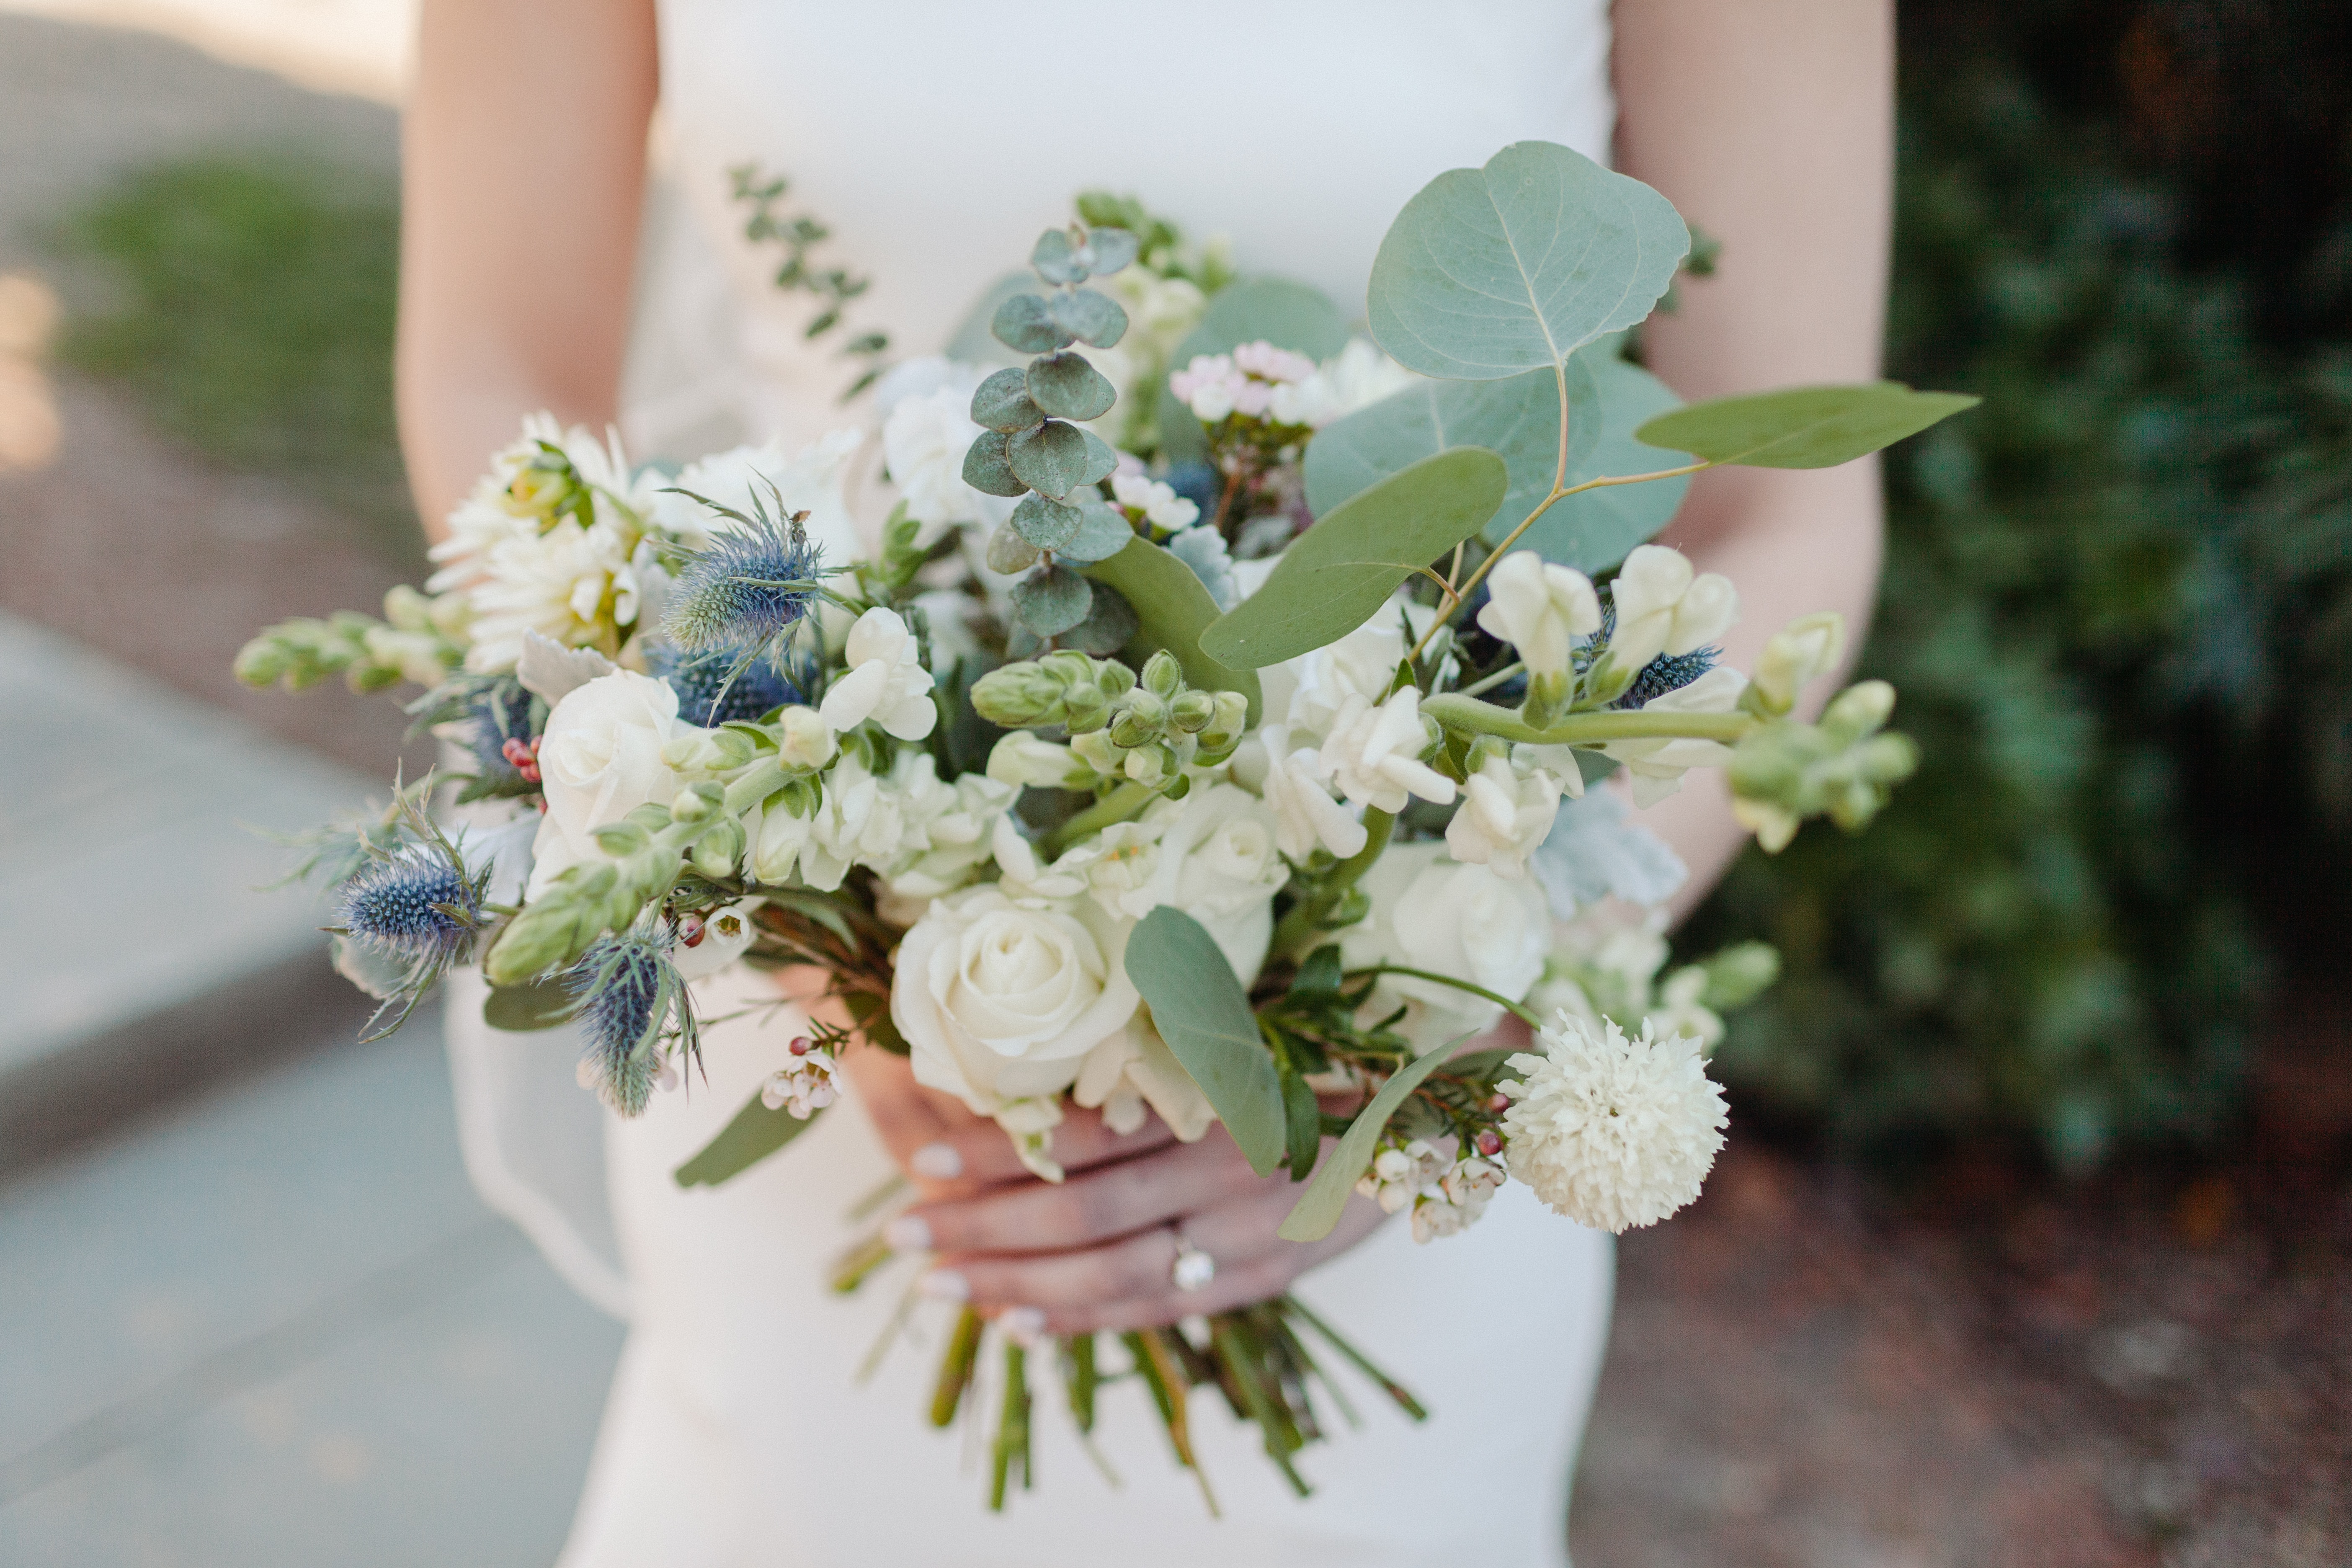 10 Flowers to Include in Your Wedding Arrangements: Which Blooms Will Look Stunning?